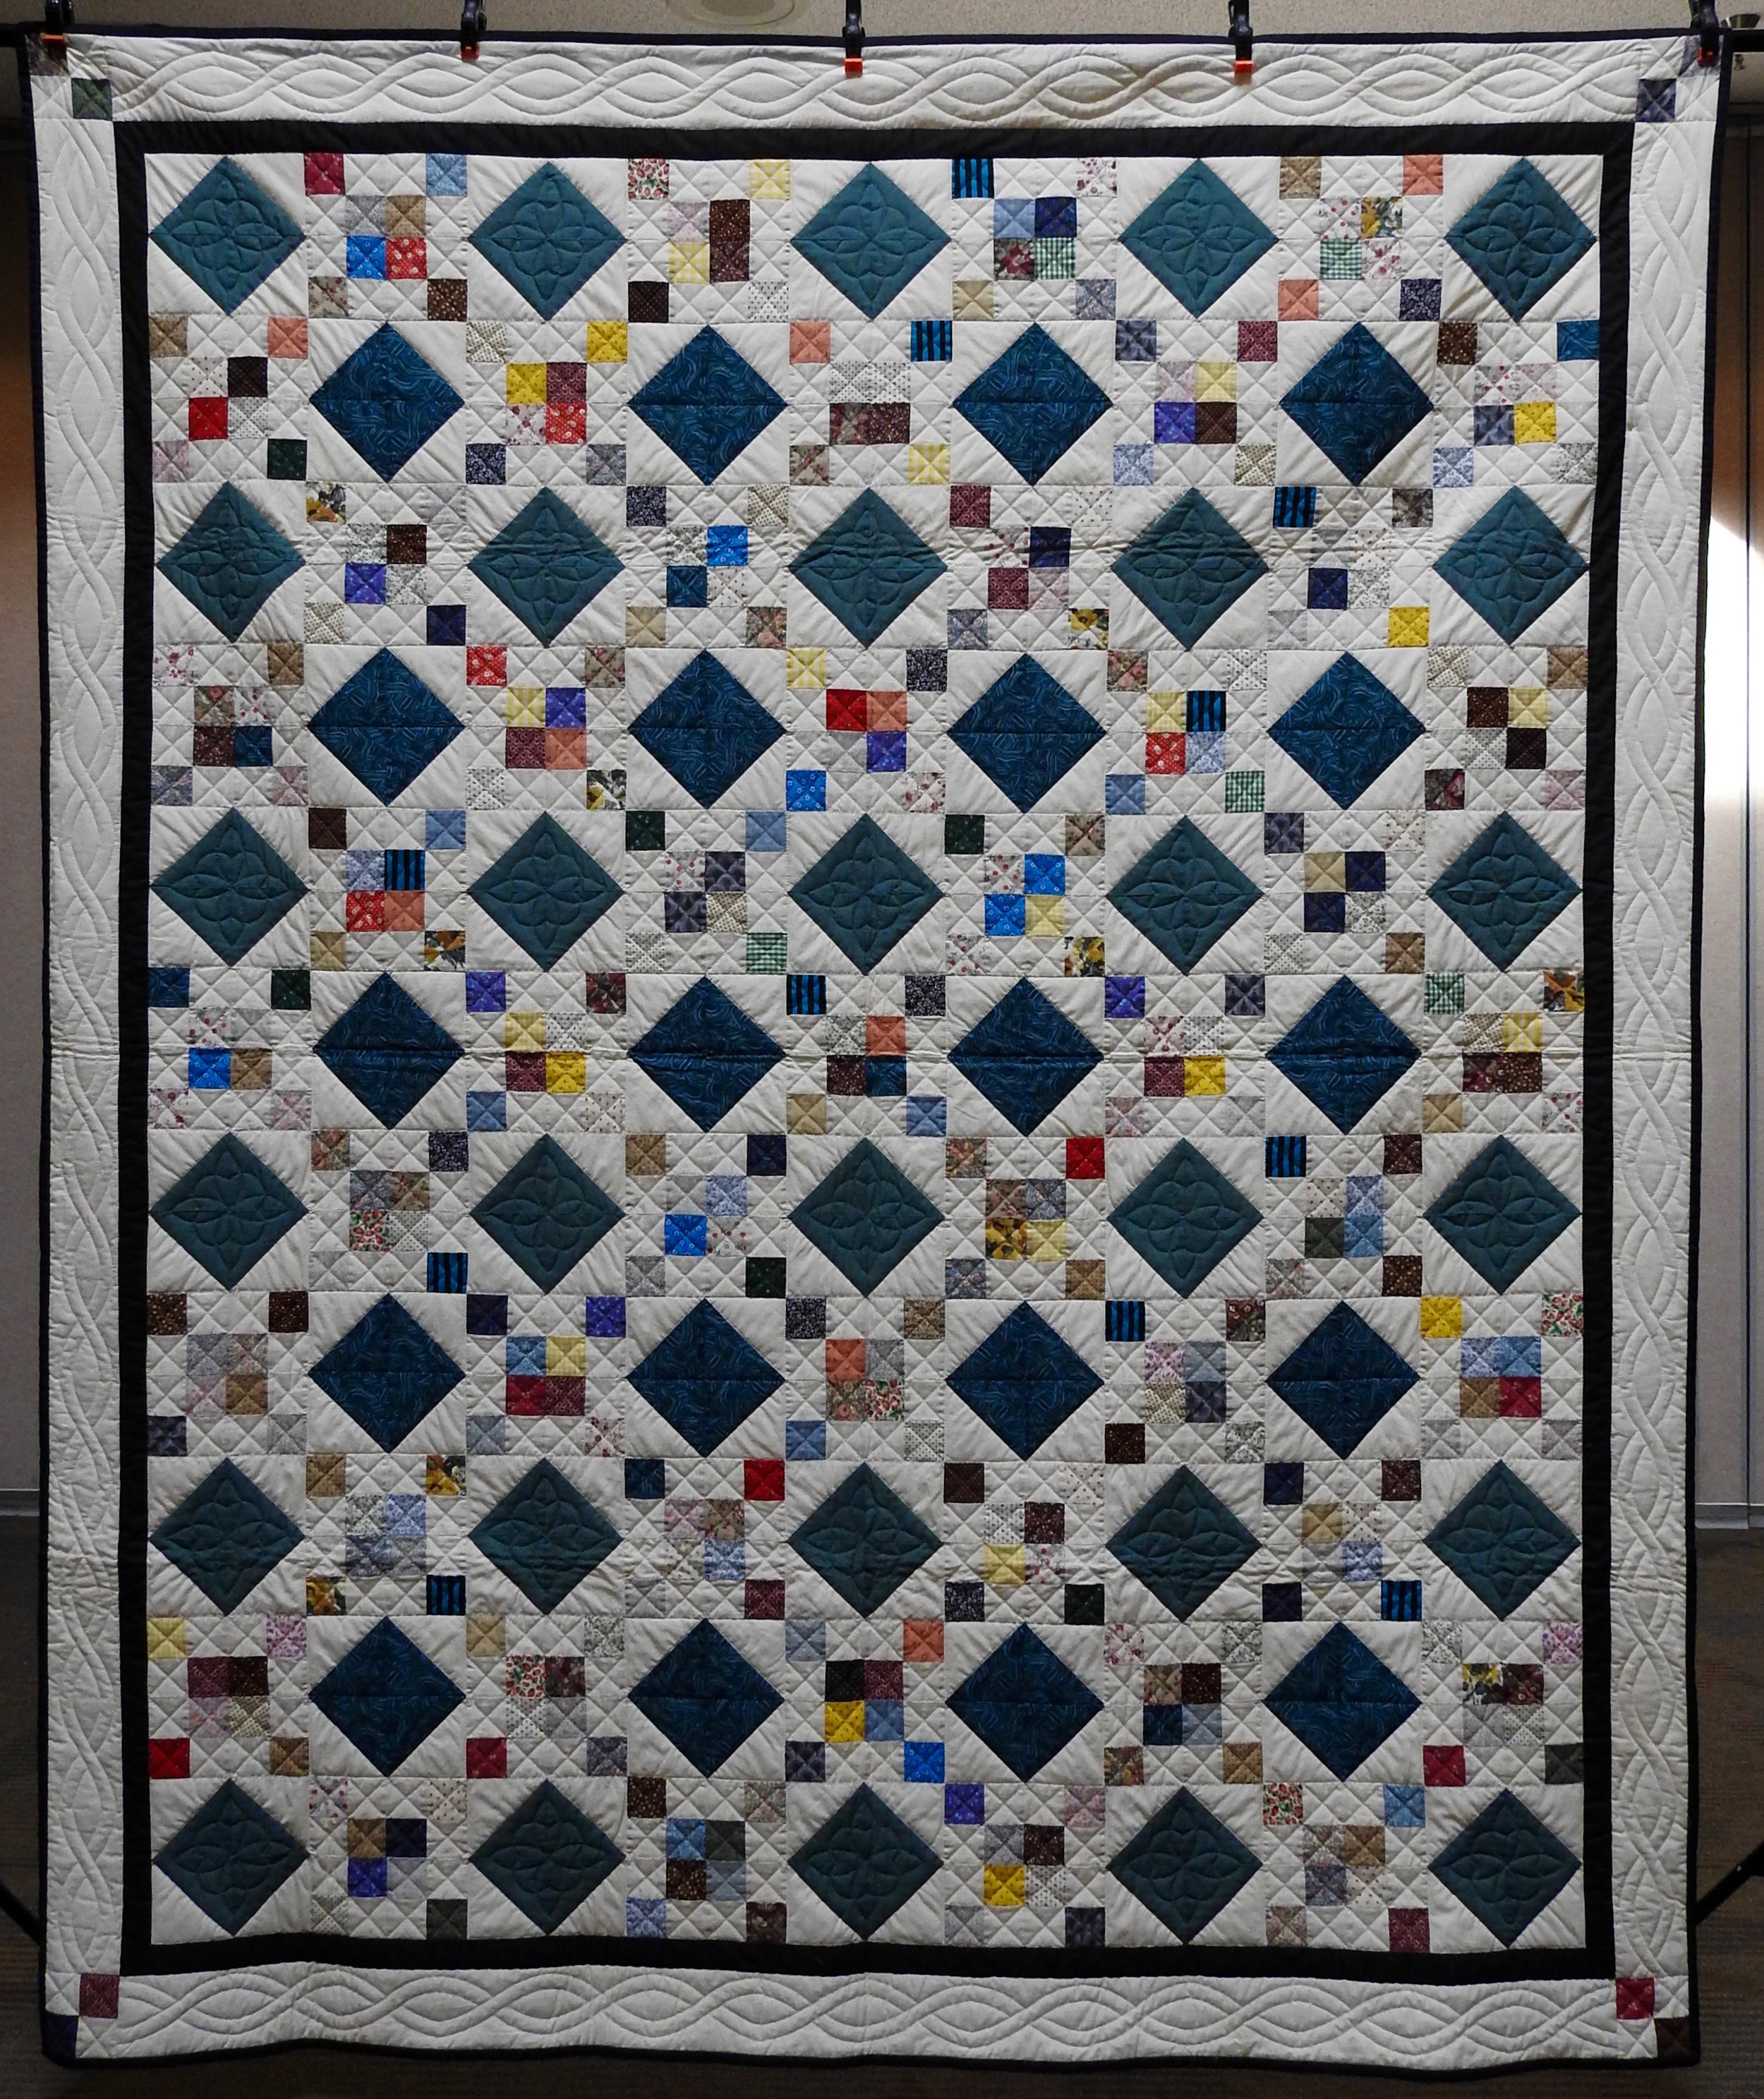 Jewel Box, Pieced &amp; Hand Quilted by Isabel Leipprandt, Signed &amp; Dated, donated by Wayne &amp; Karen Moss, 82 x 99”